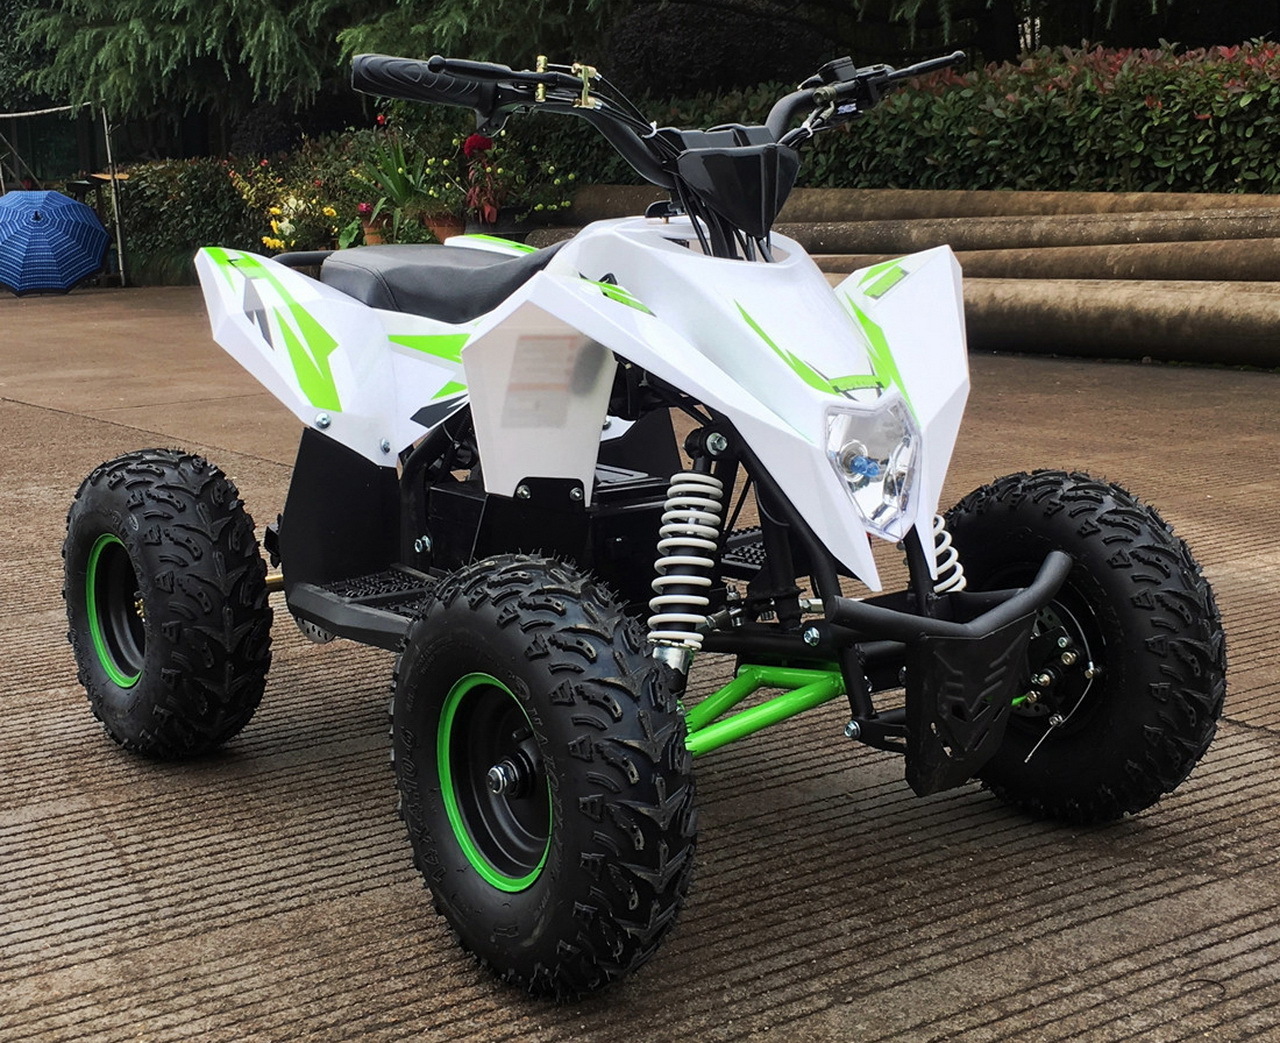 Buy electric ATVs for Kids: Fun for kids who love off-road adventures